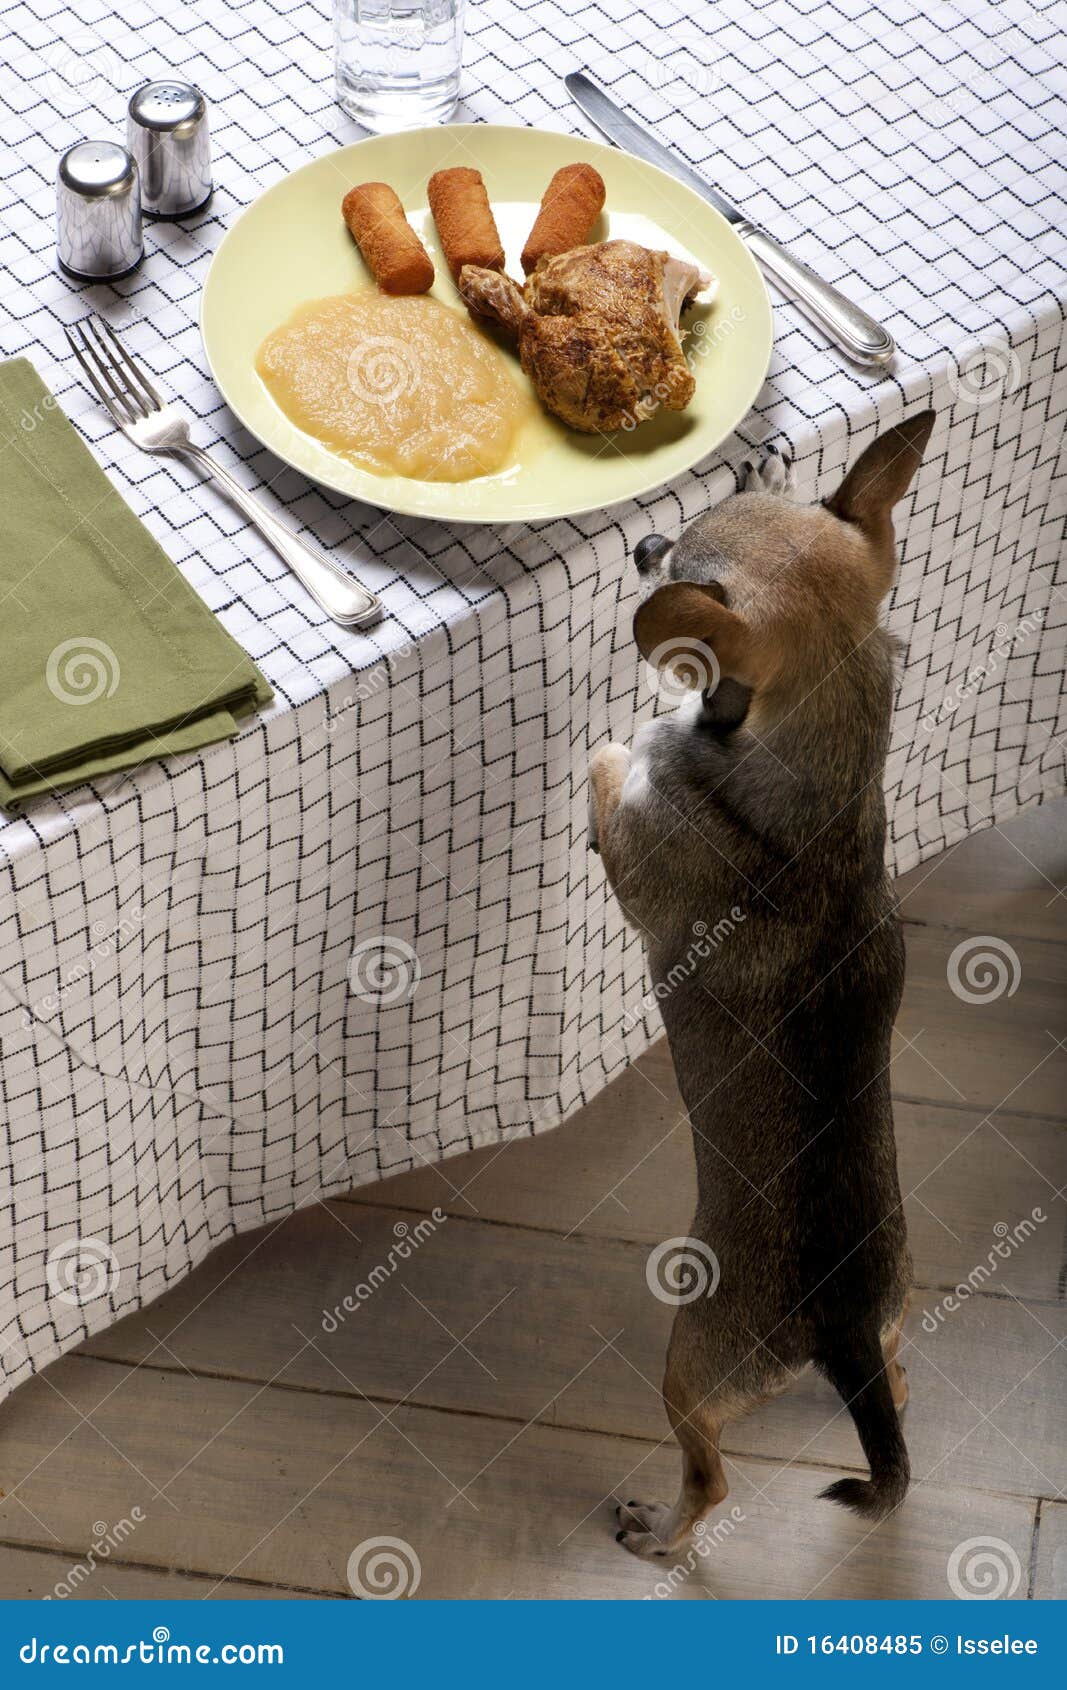 chihuahua on hind legs looking at leftover food